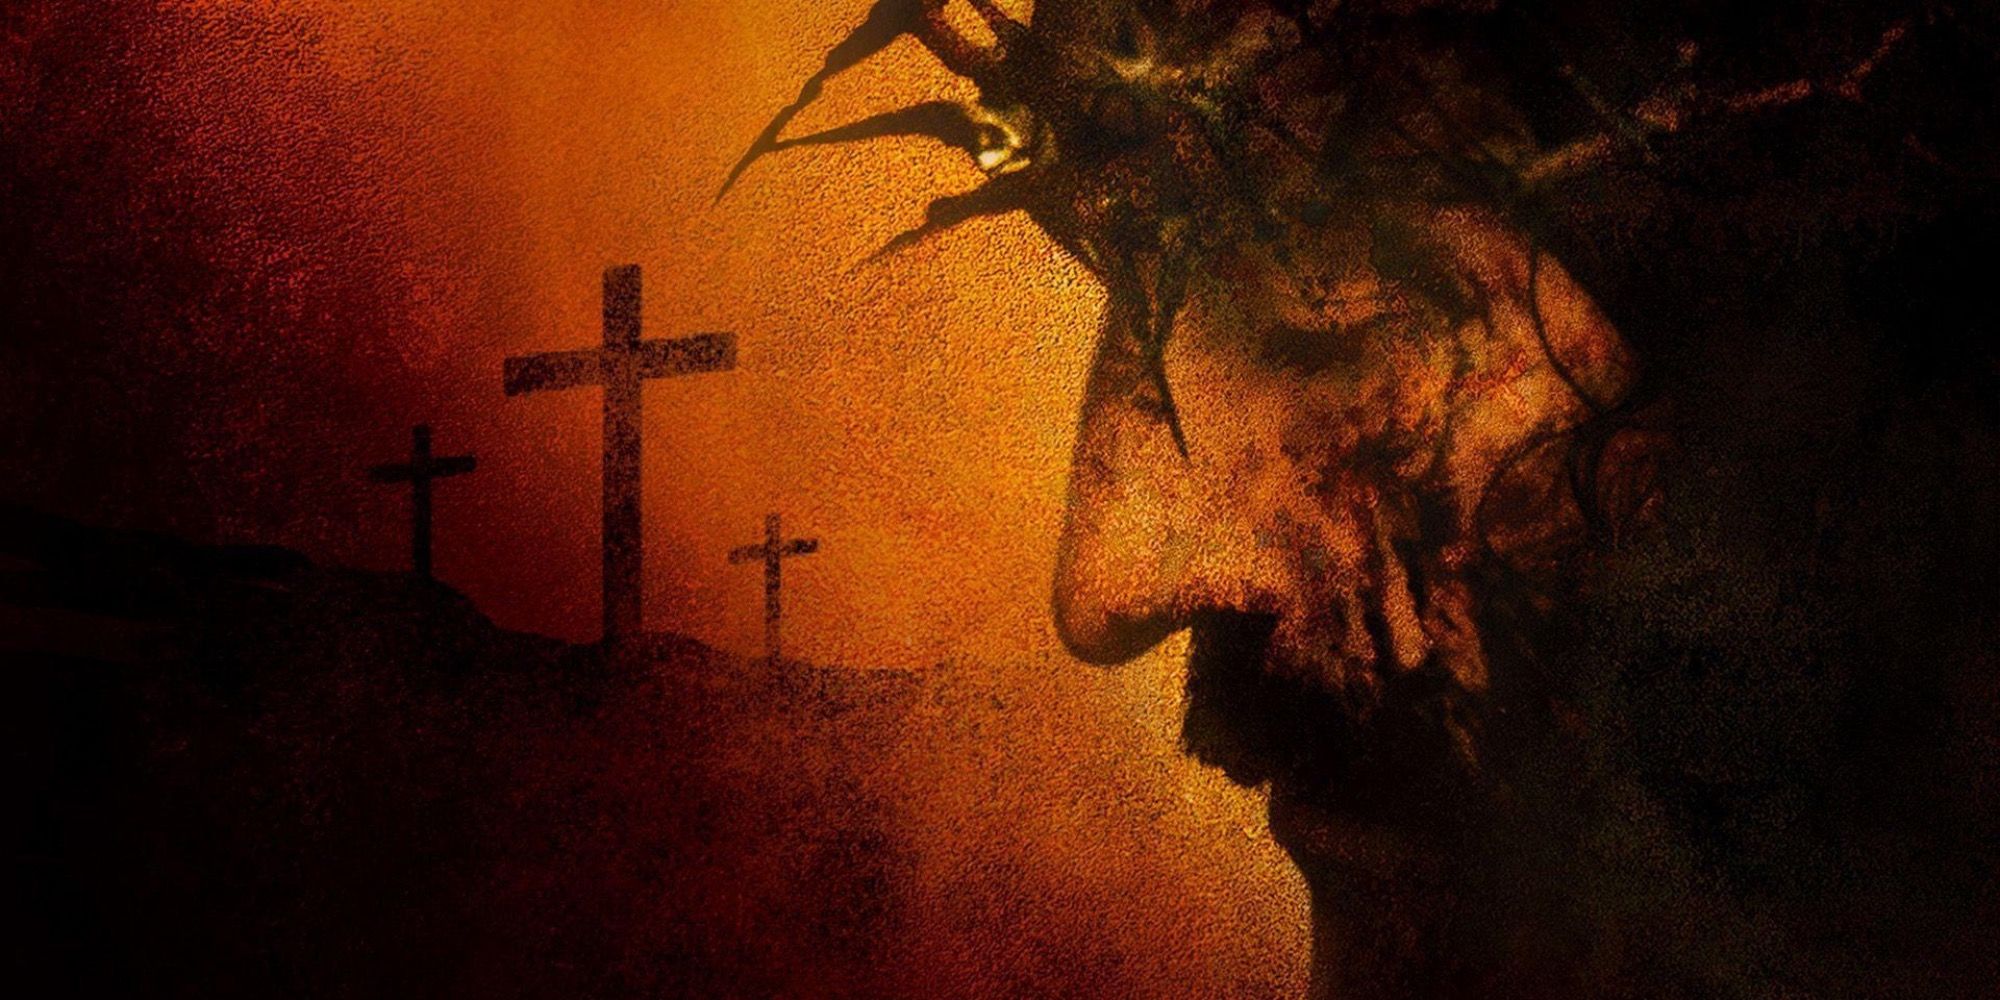 Jesus wearing a crown of thorns with 3 crosses in the background